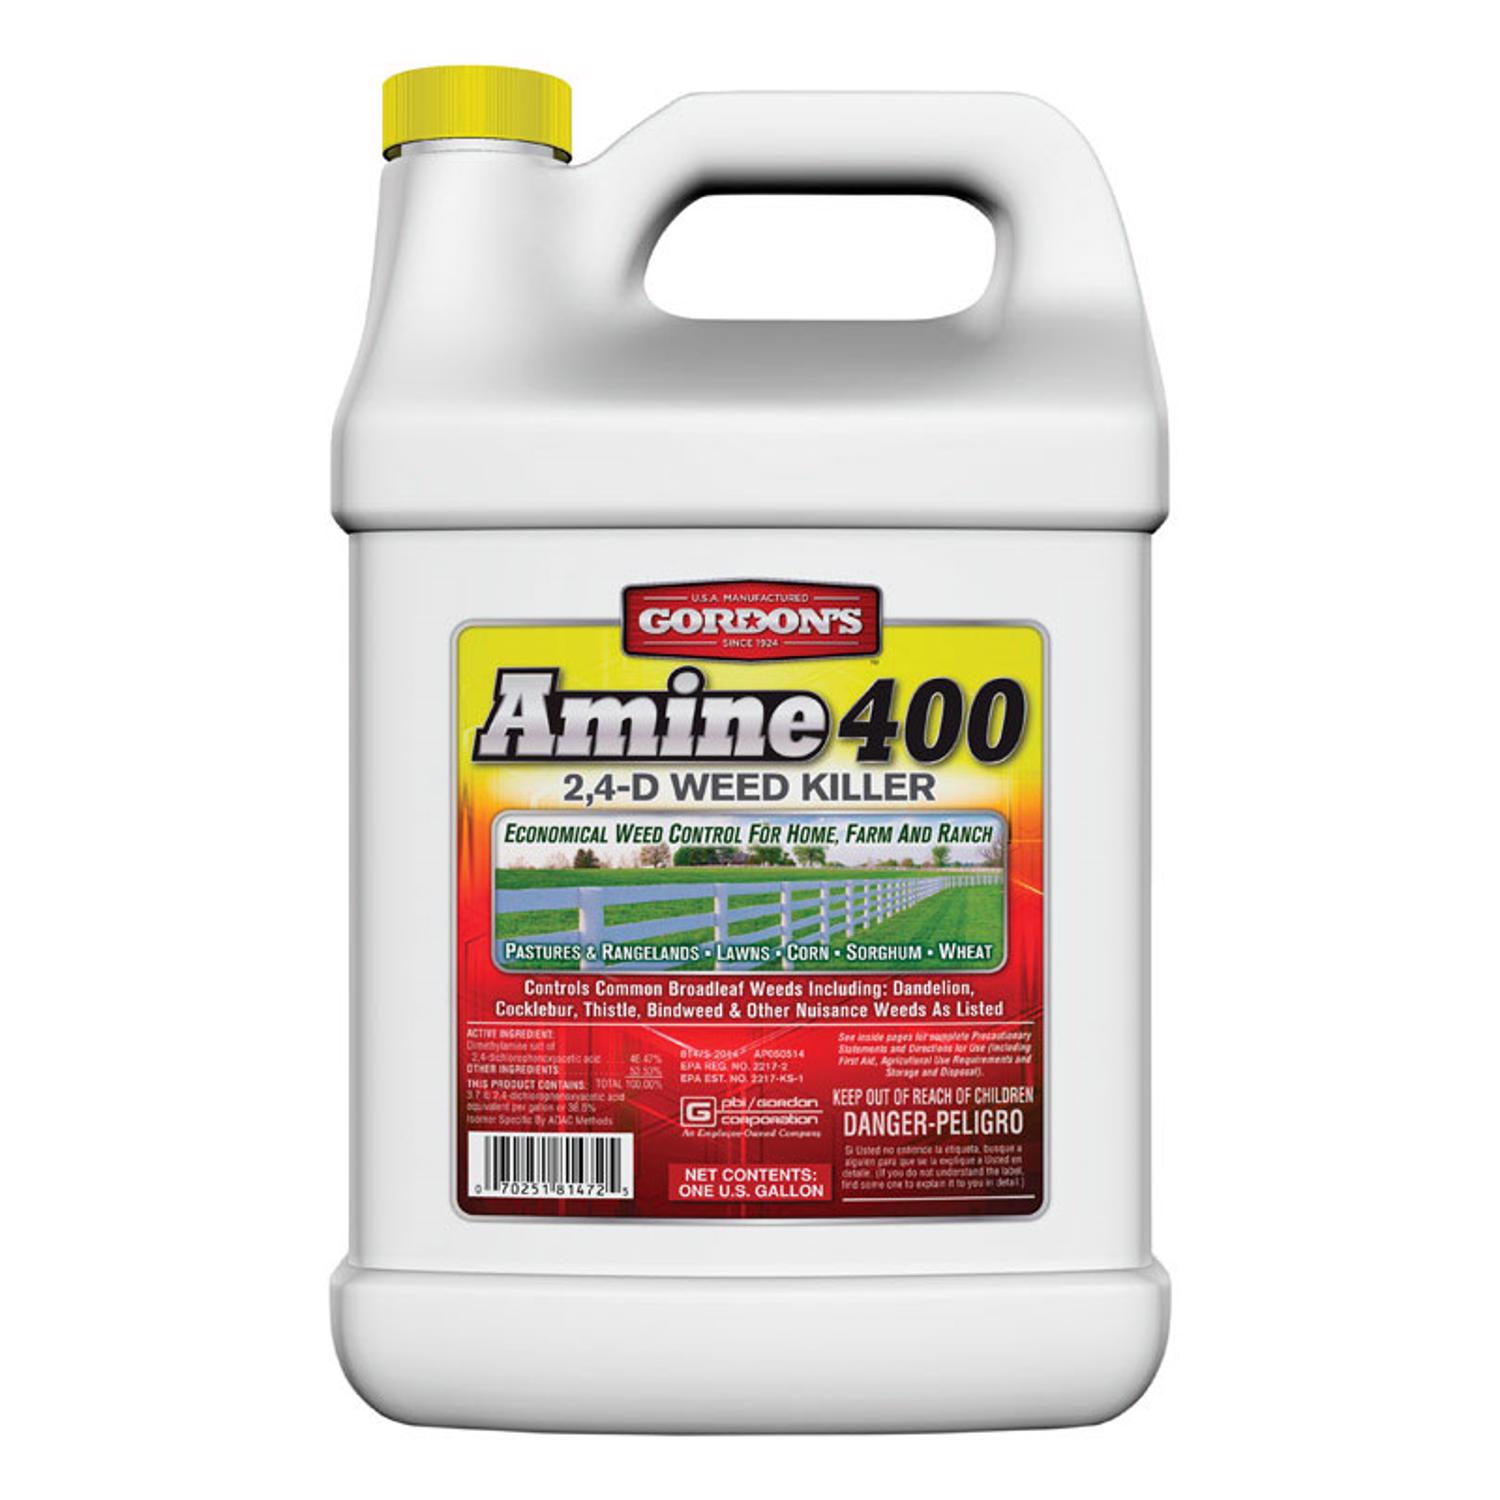 Photos - Lawn Mower Accessory Gordon's Amine 400 Weed Killer Concentrate 1 gal 8141072